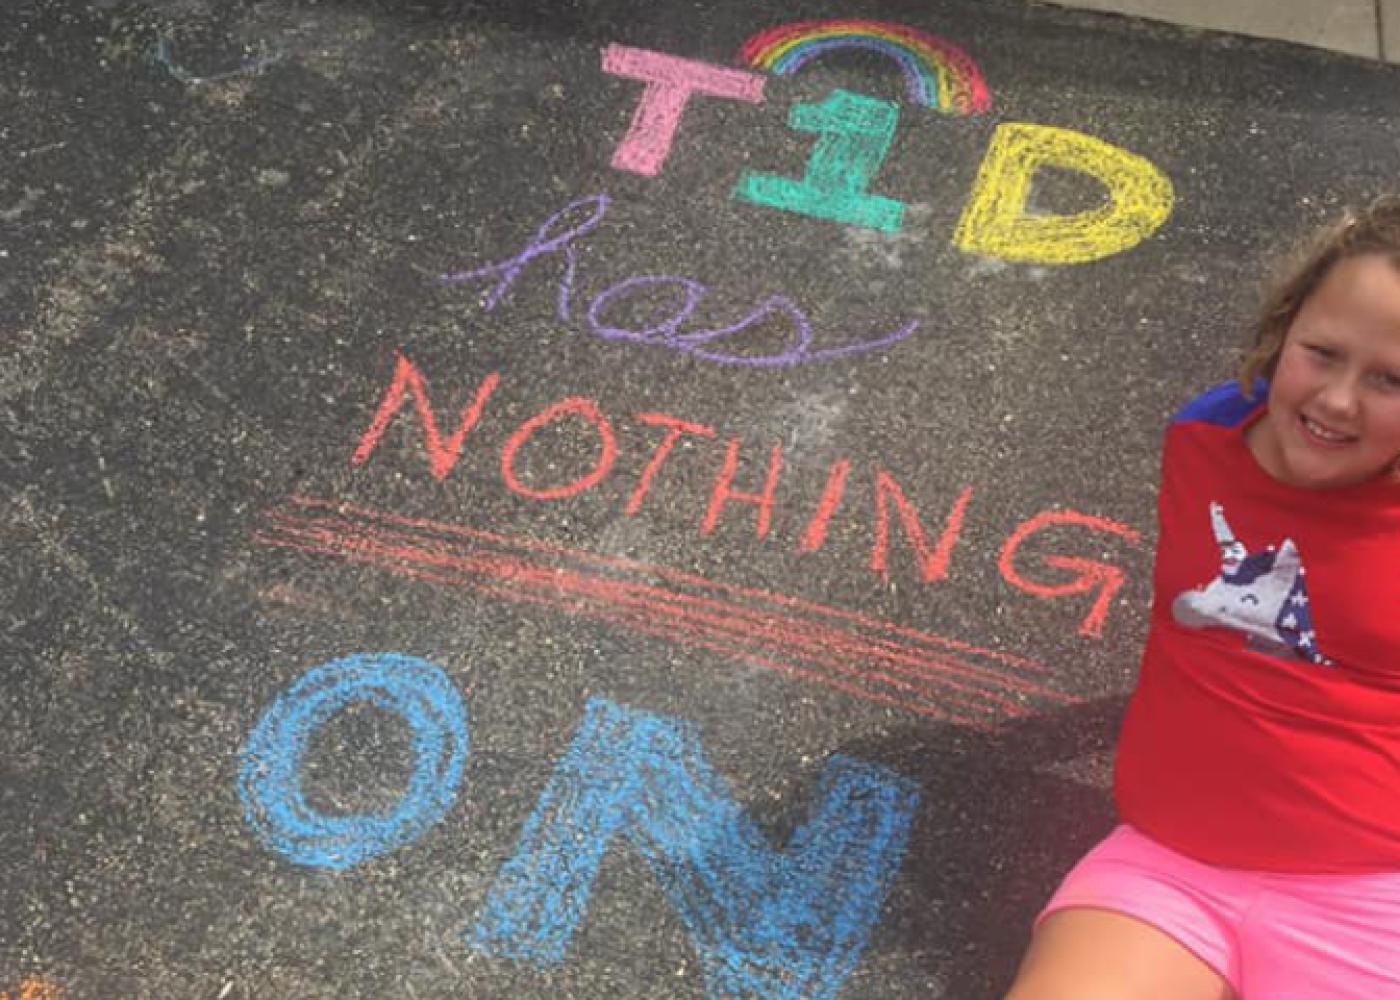 Girl in red shirt on asphalt with colored chalk writing